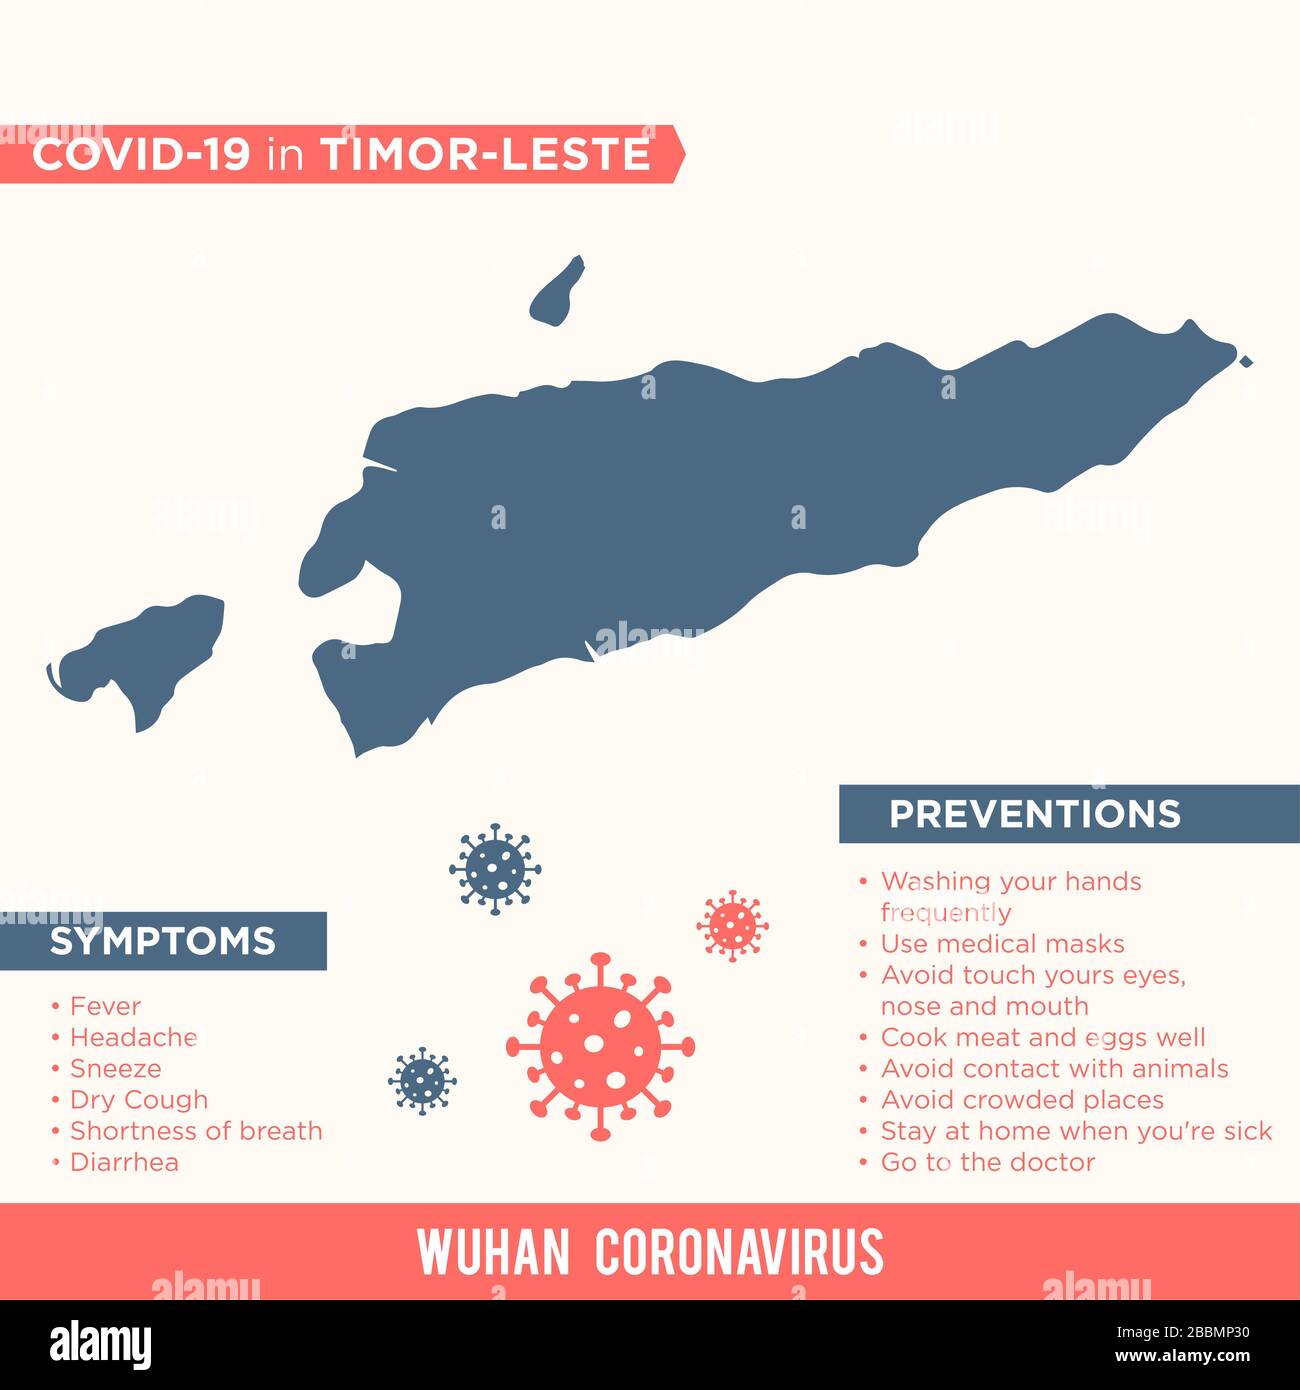 Timor-Leste - Asia Country Map. Covid-29, Corona Virus Map Infographic Vector Template EPS 10. Stock Photo